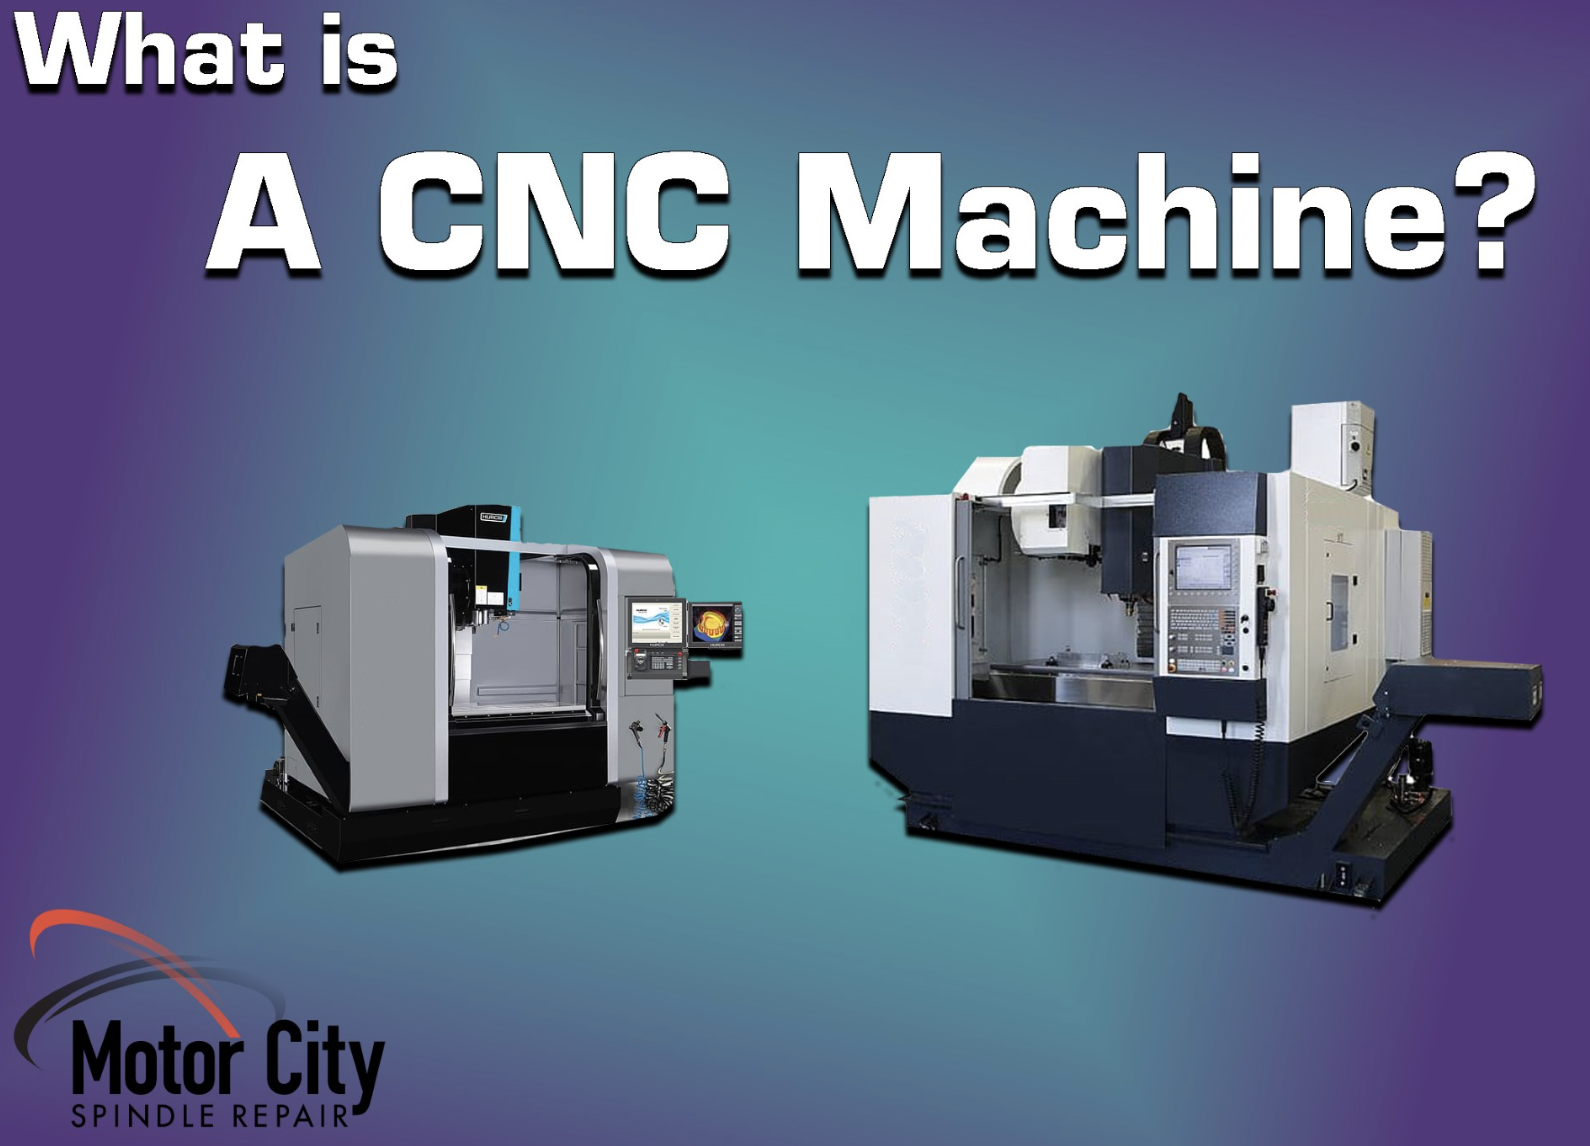 GROB automates manufacturing of CNC machines for the automotive